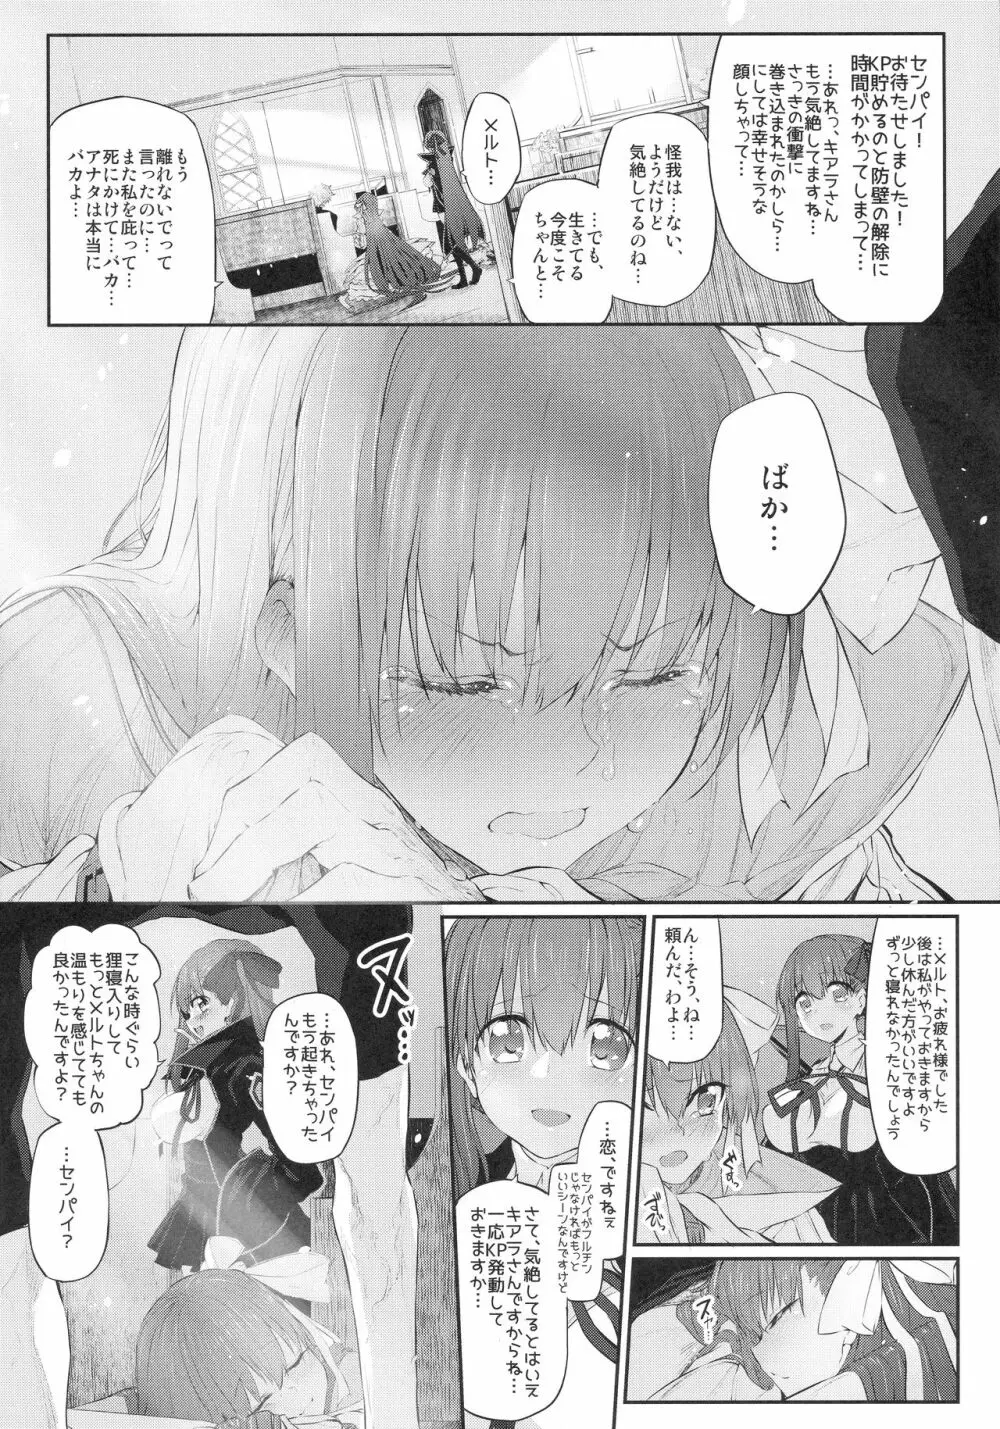 Marked girls vol. 15 Page.15